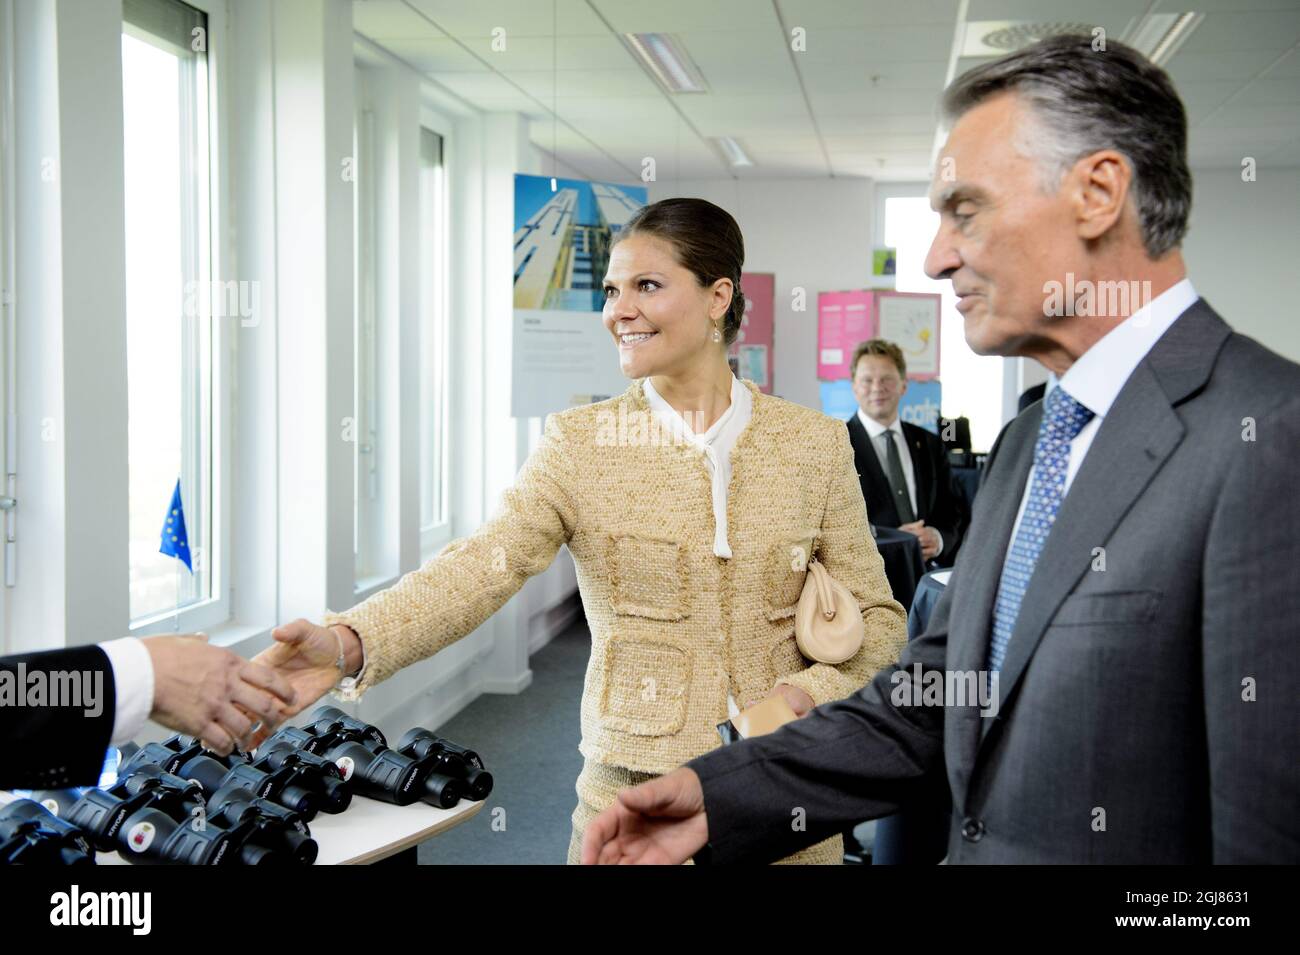 LUND 2013-10-03 Crown Princess Victoria and President Anibal Cavaco Silva of Portugal are seen during a visit to Ideon Gateway in Lund, Sweden, October 3, 2013. The Crown Princess couple accompanied President Anibal Cavaco Silva and his wife Maria. The Ideon Gateway is a model for building a city part designed for research and innovation. The President of Portugal is on a State visit to Sweden. Foto: Ludvig Thunman / TT / Kod 10600  Stock Photo